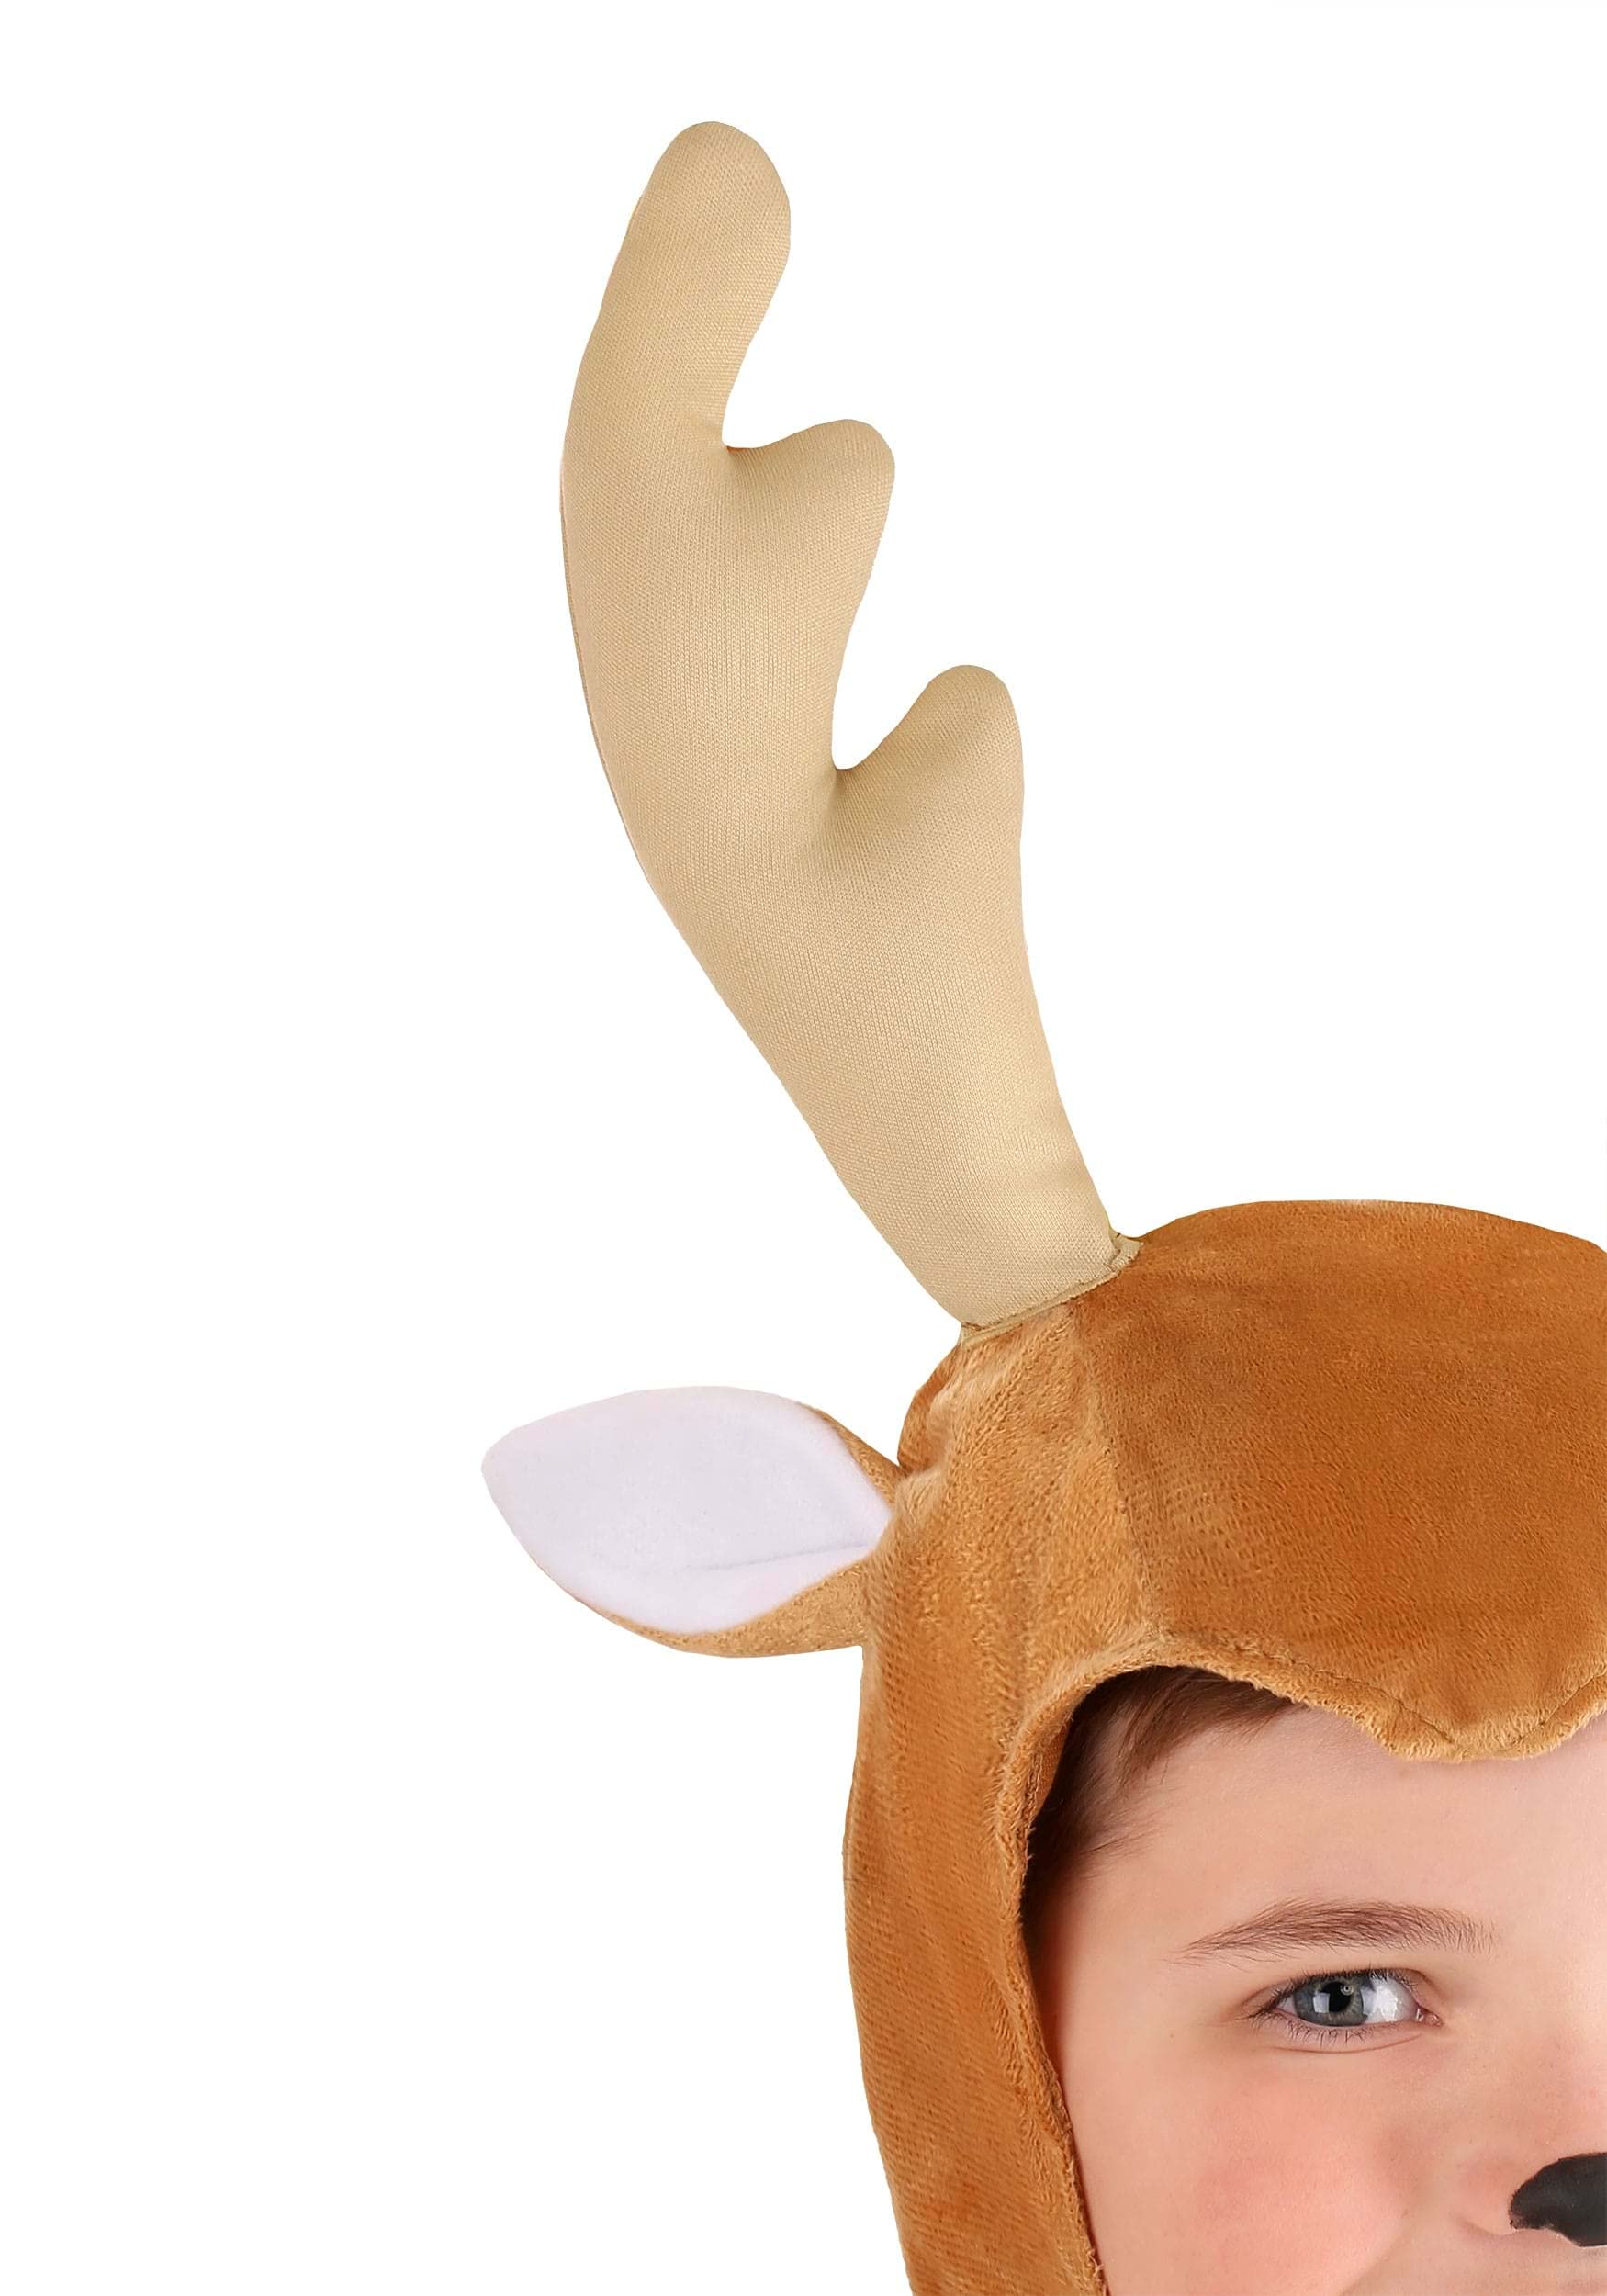 Deer Costume for Kids Reindeer Outfit for Boys and Girls